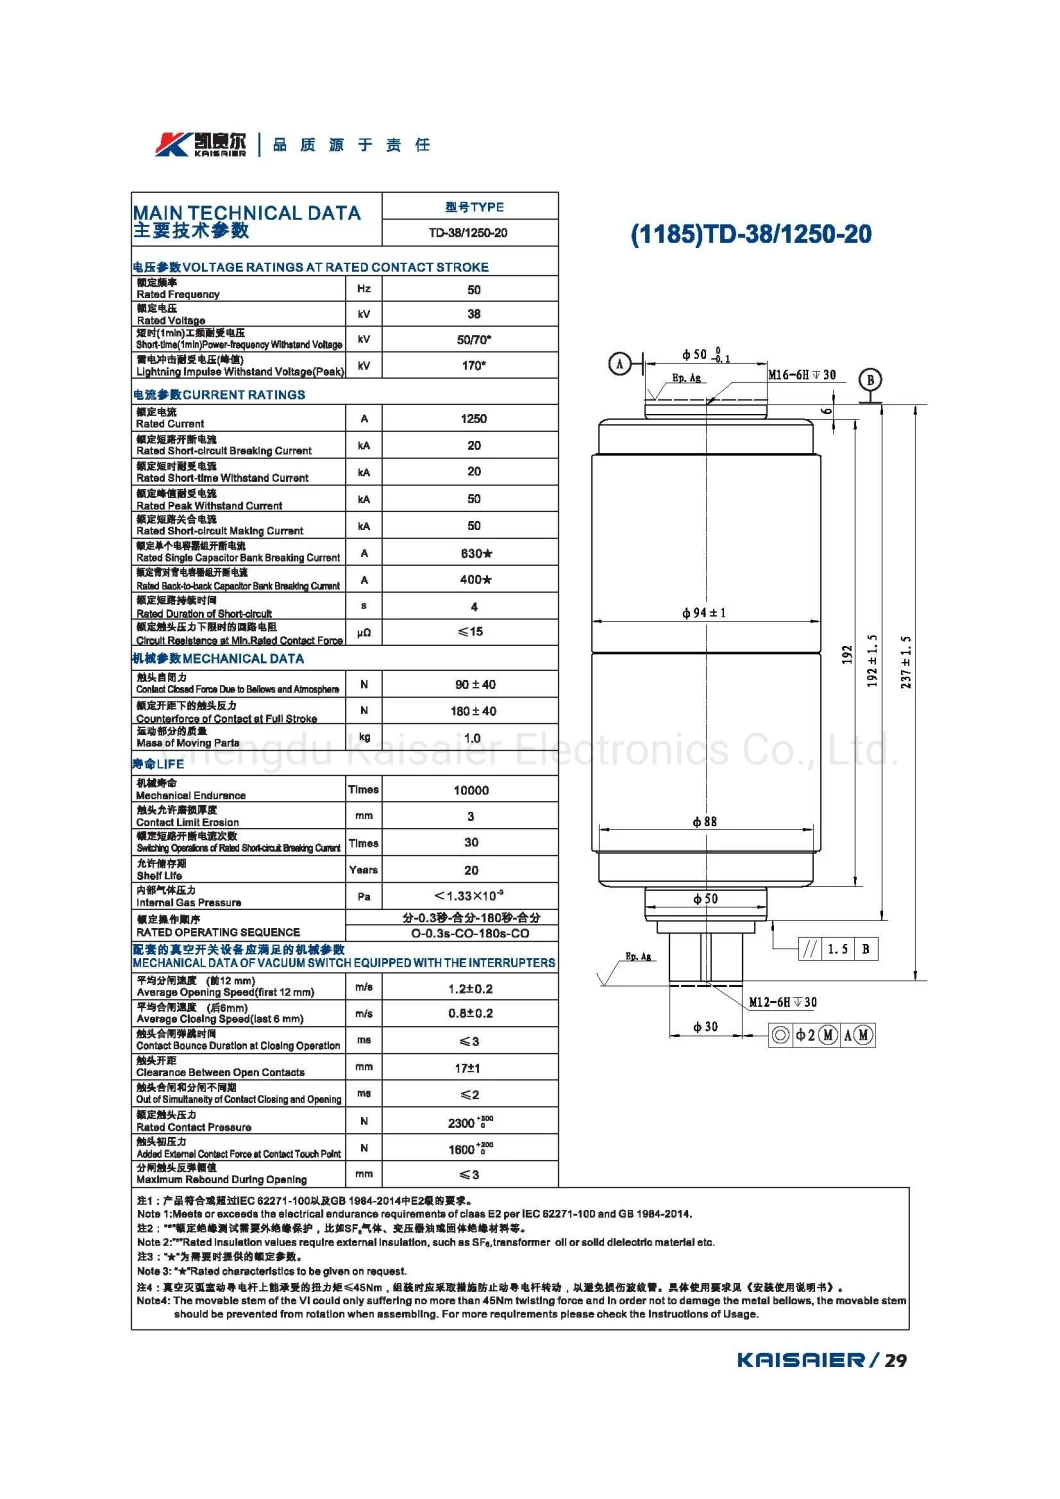 Important Electrical Component Circuit Breaker with Safety Requirement